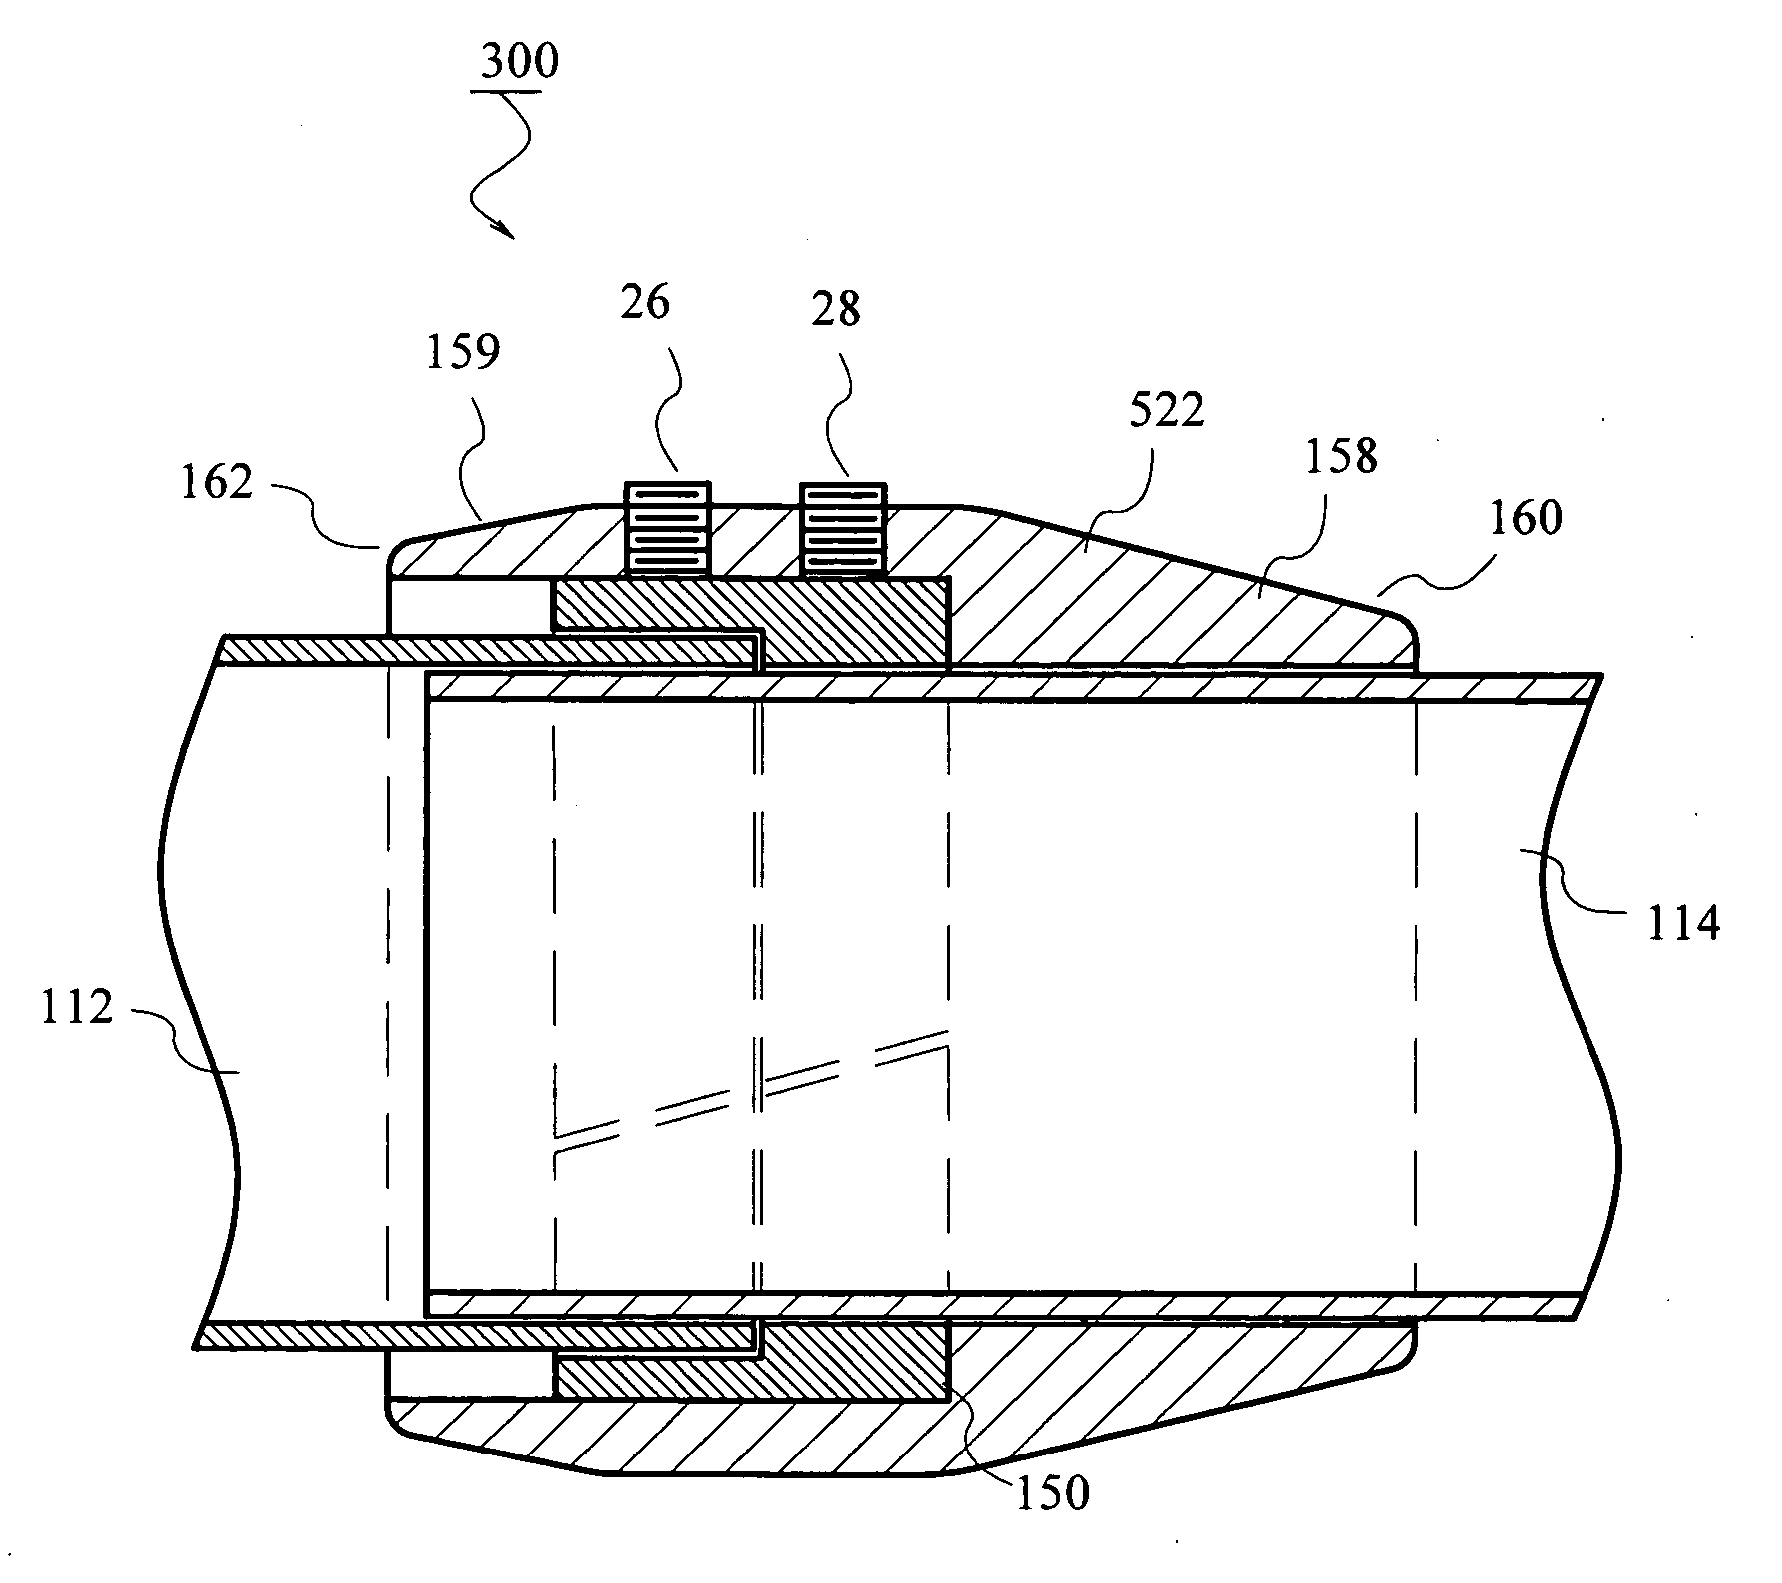 Device and method for making and using a pipe coupling device